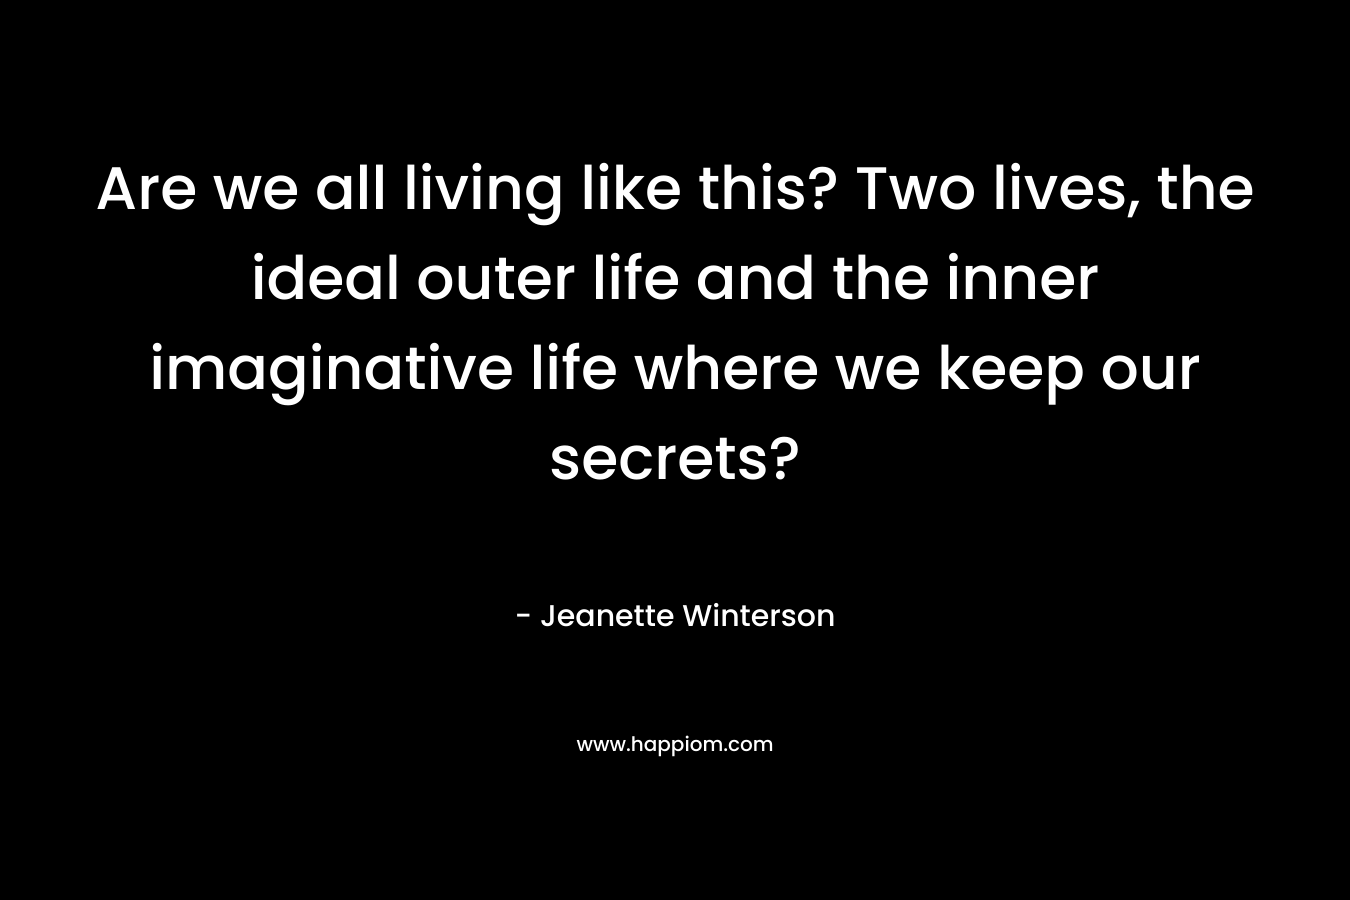 Are we all living like this? Two lives, the ideal outer life and the inner imaginative life where we keep our secrets?